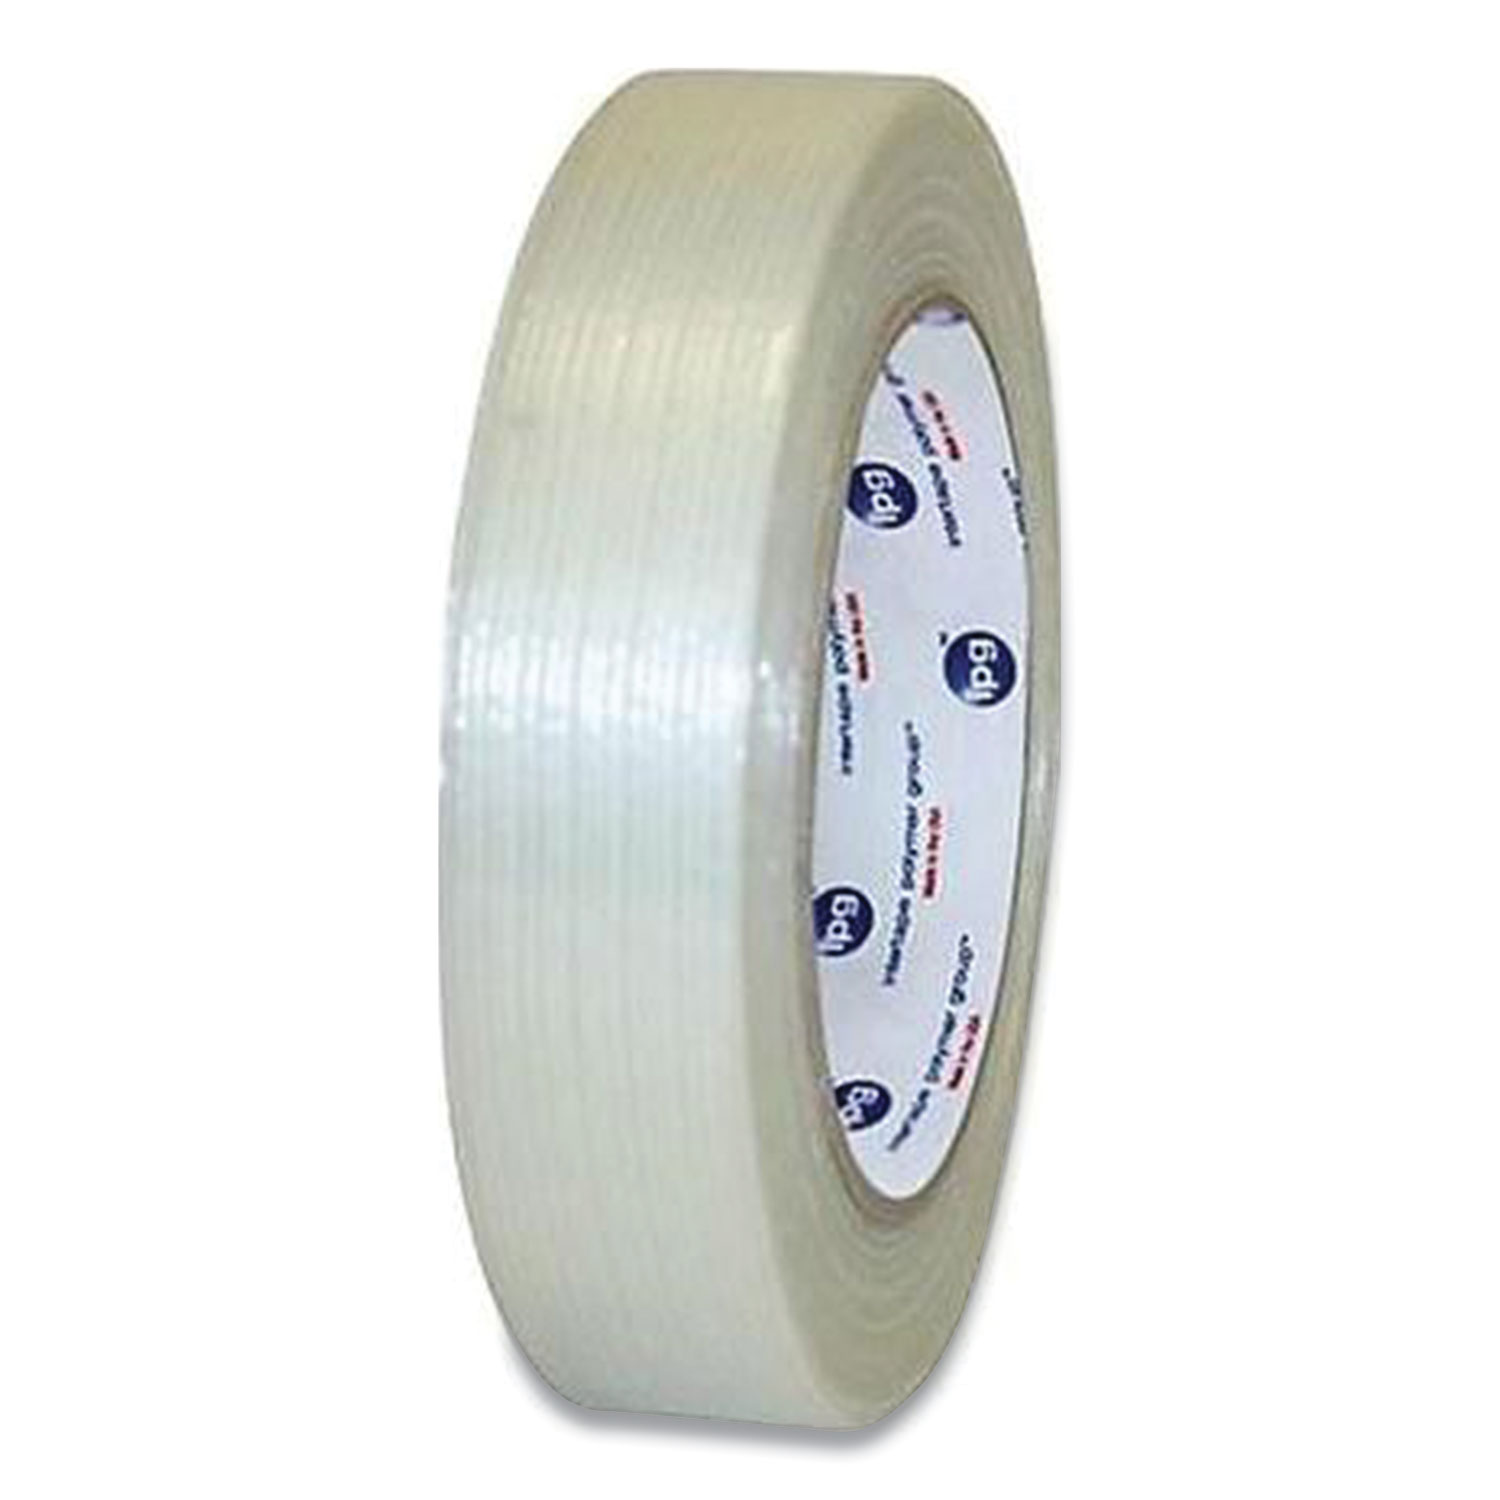  ipg RG3001 Filament Strapping/Packing Tape, 3 Core, 1 x 60 yds, Transparent, 9/Pack (IPG483095) 